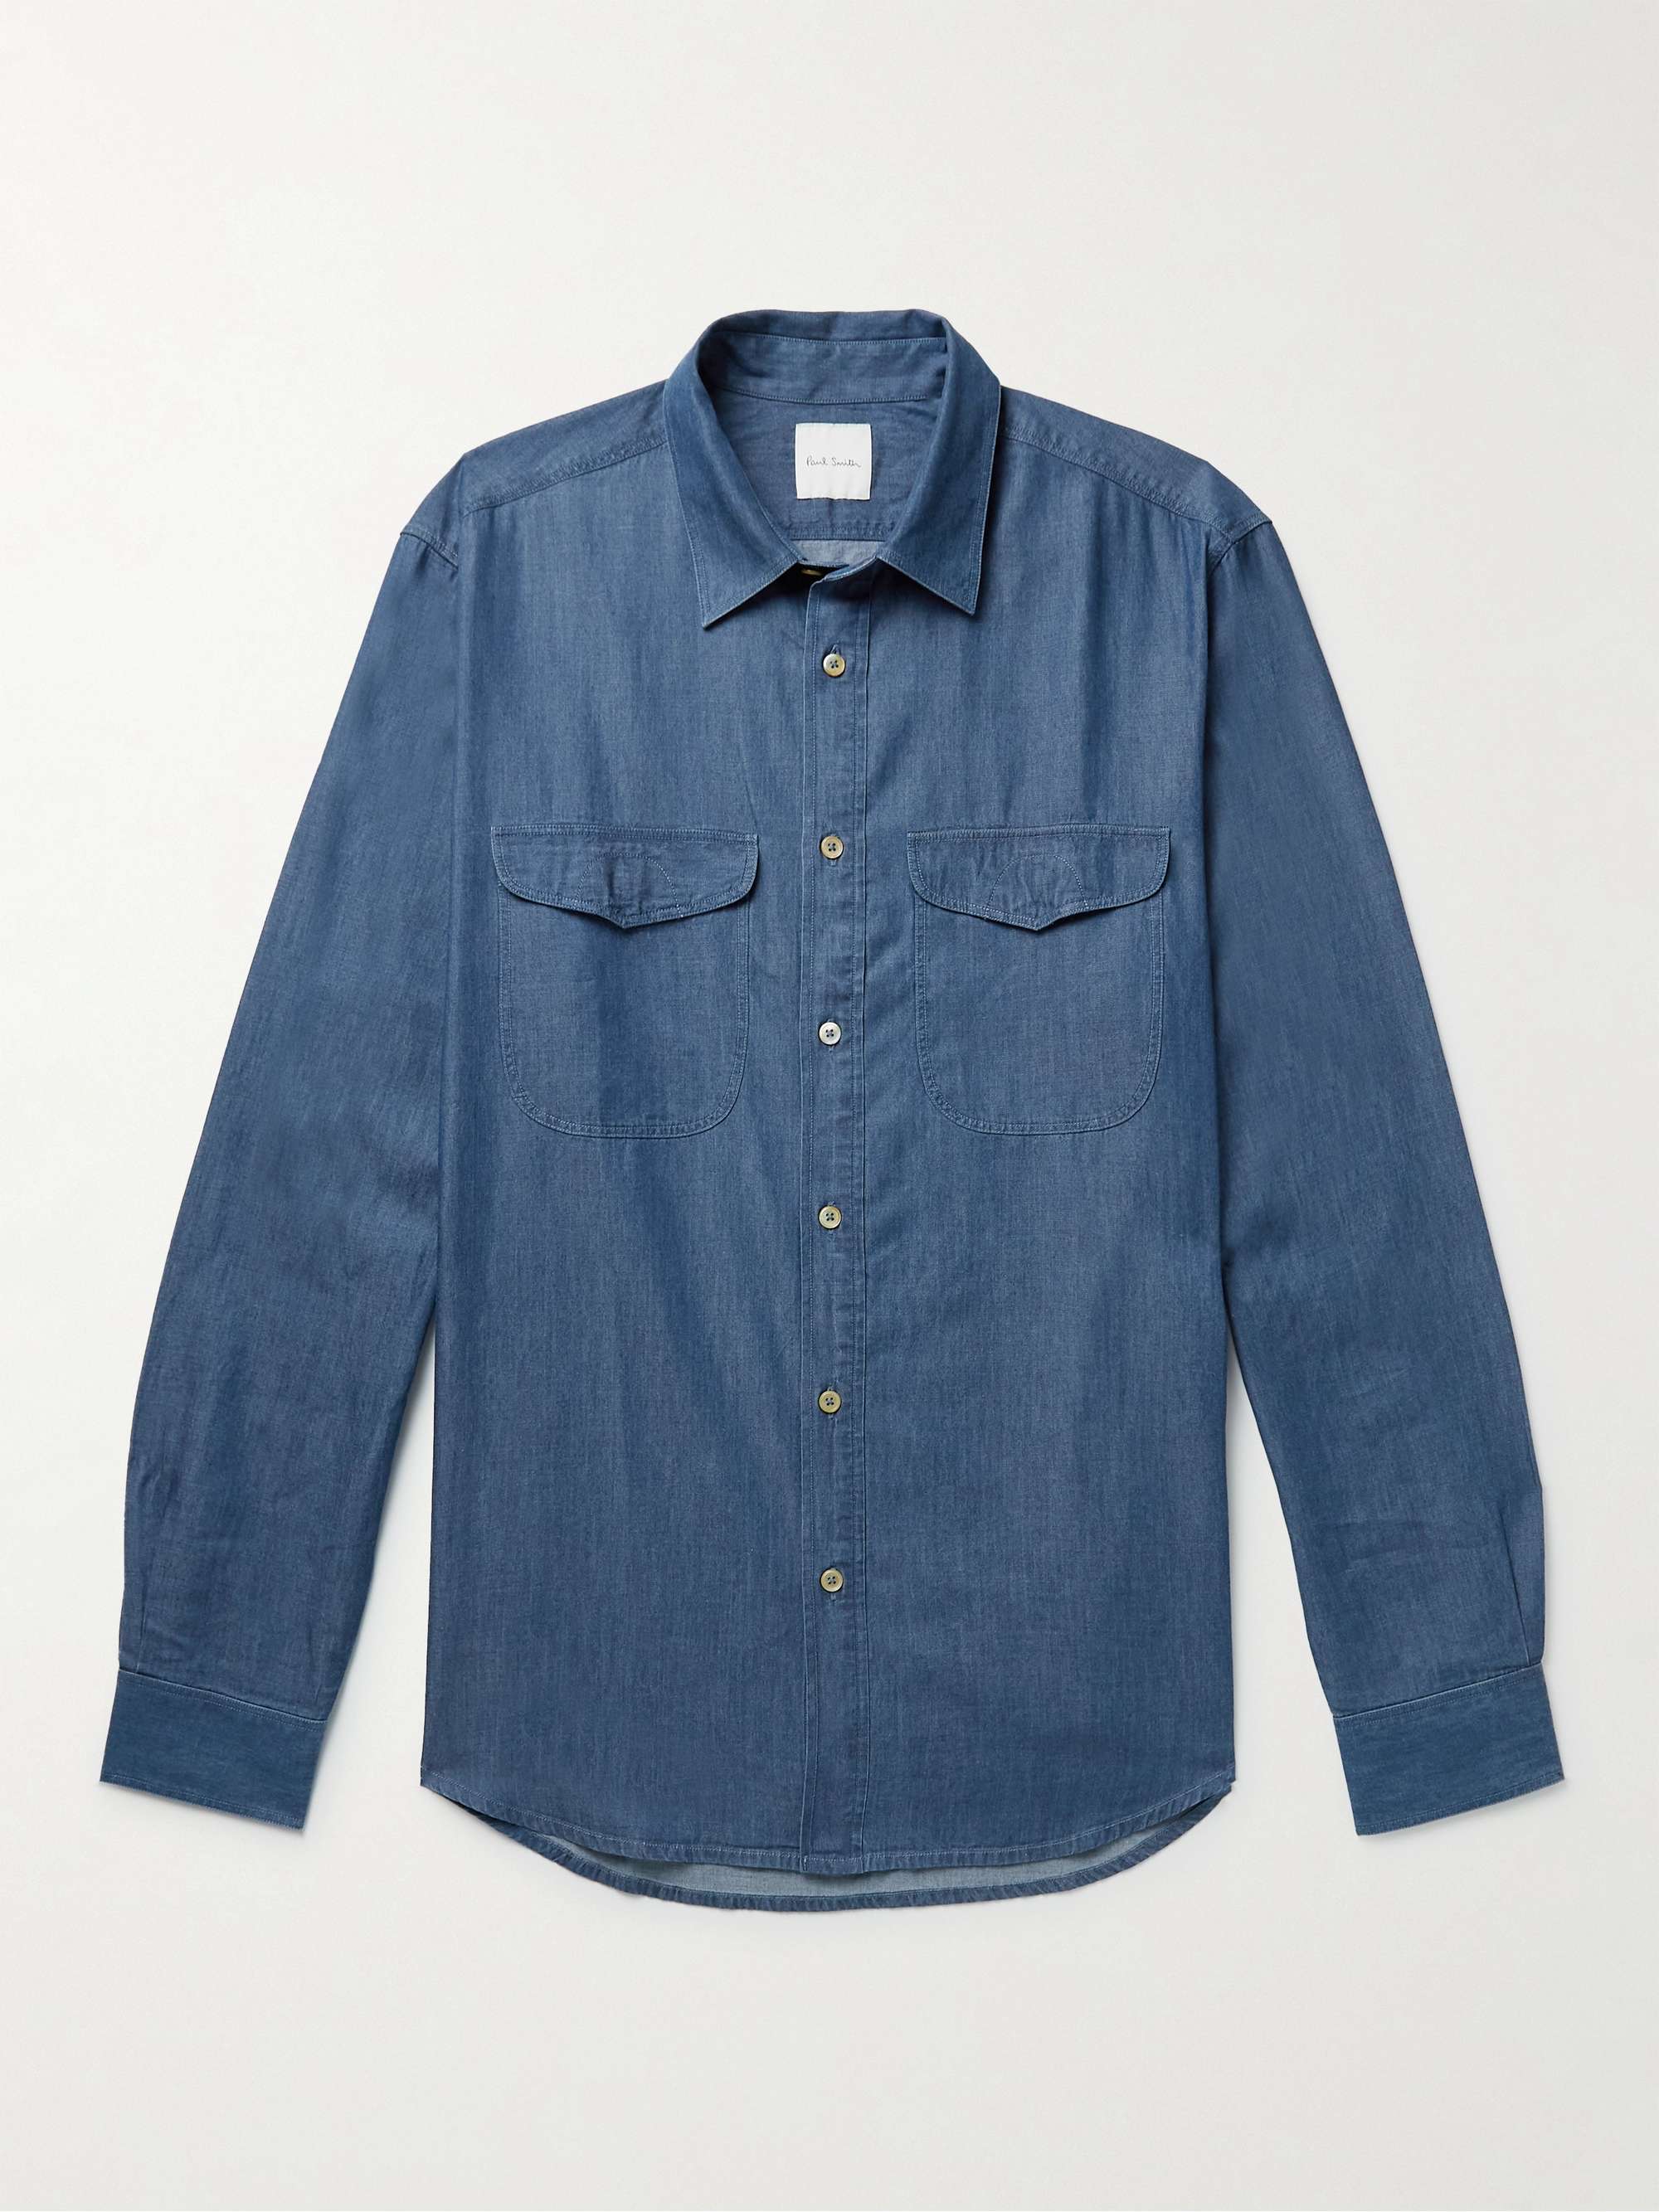 PAUL SMITH Gents Cotton and Lyocell-Blend Chambray Shirt | MR PORTER